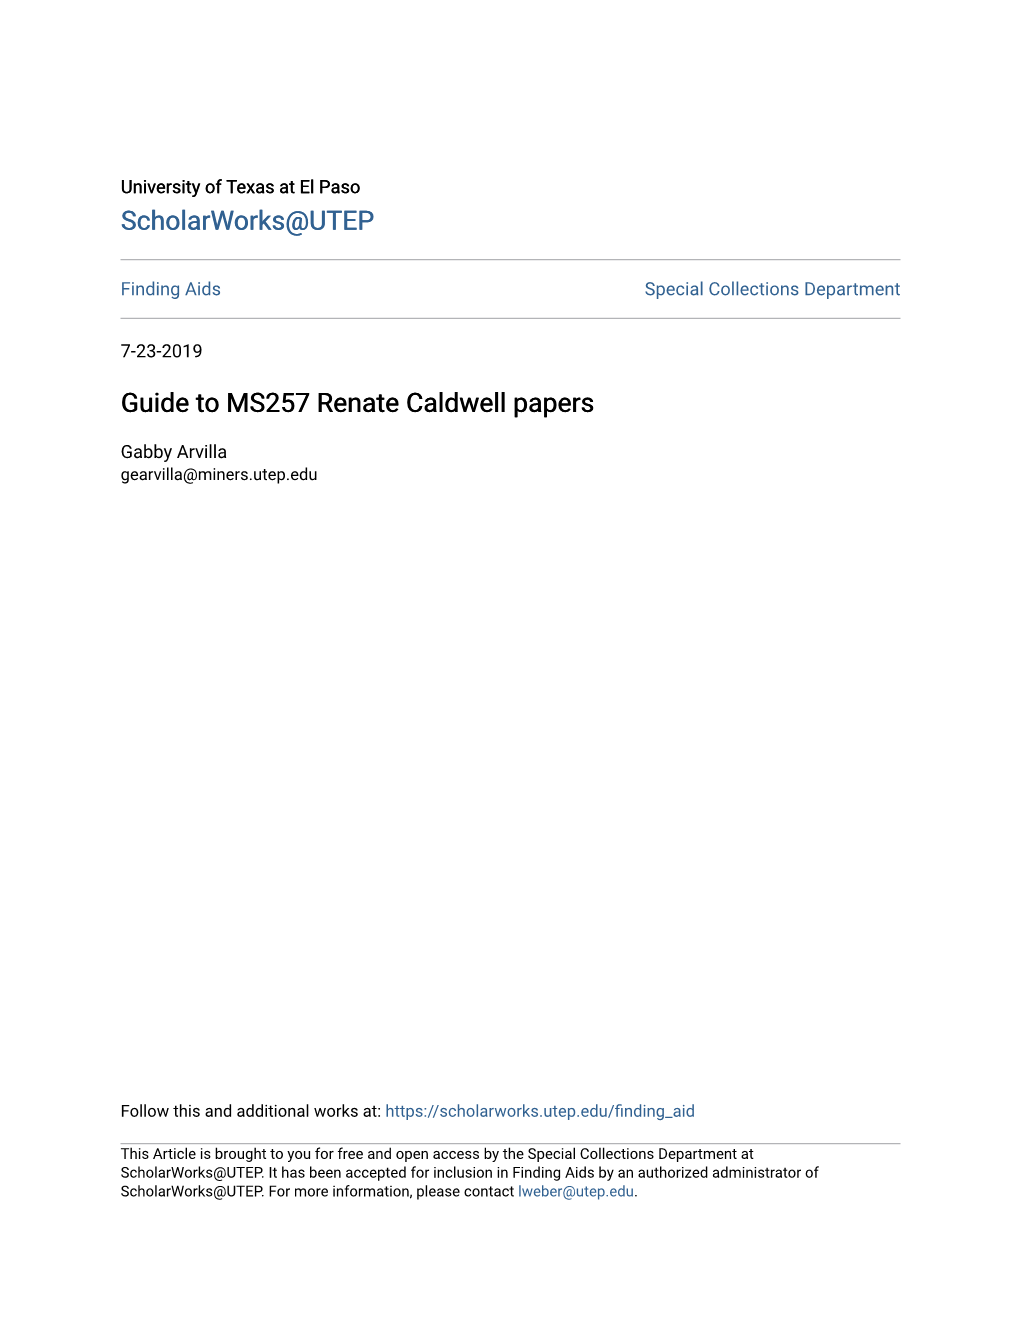 Guide to MS257 Renate Caldwell Papers